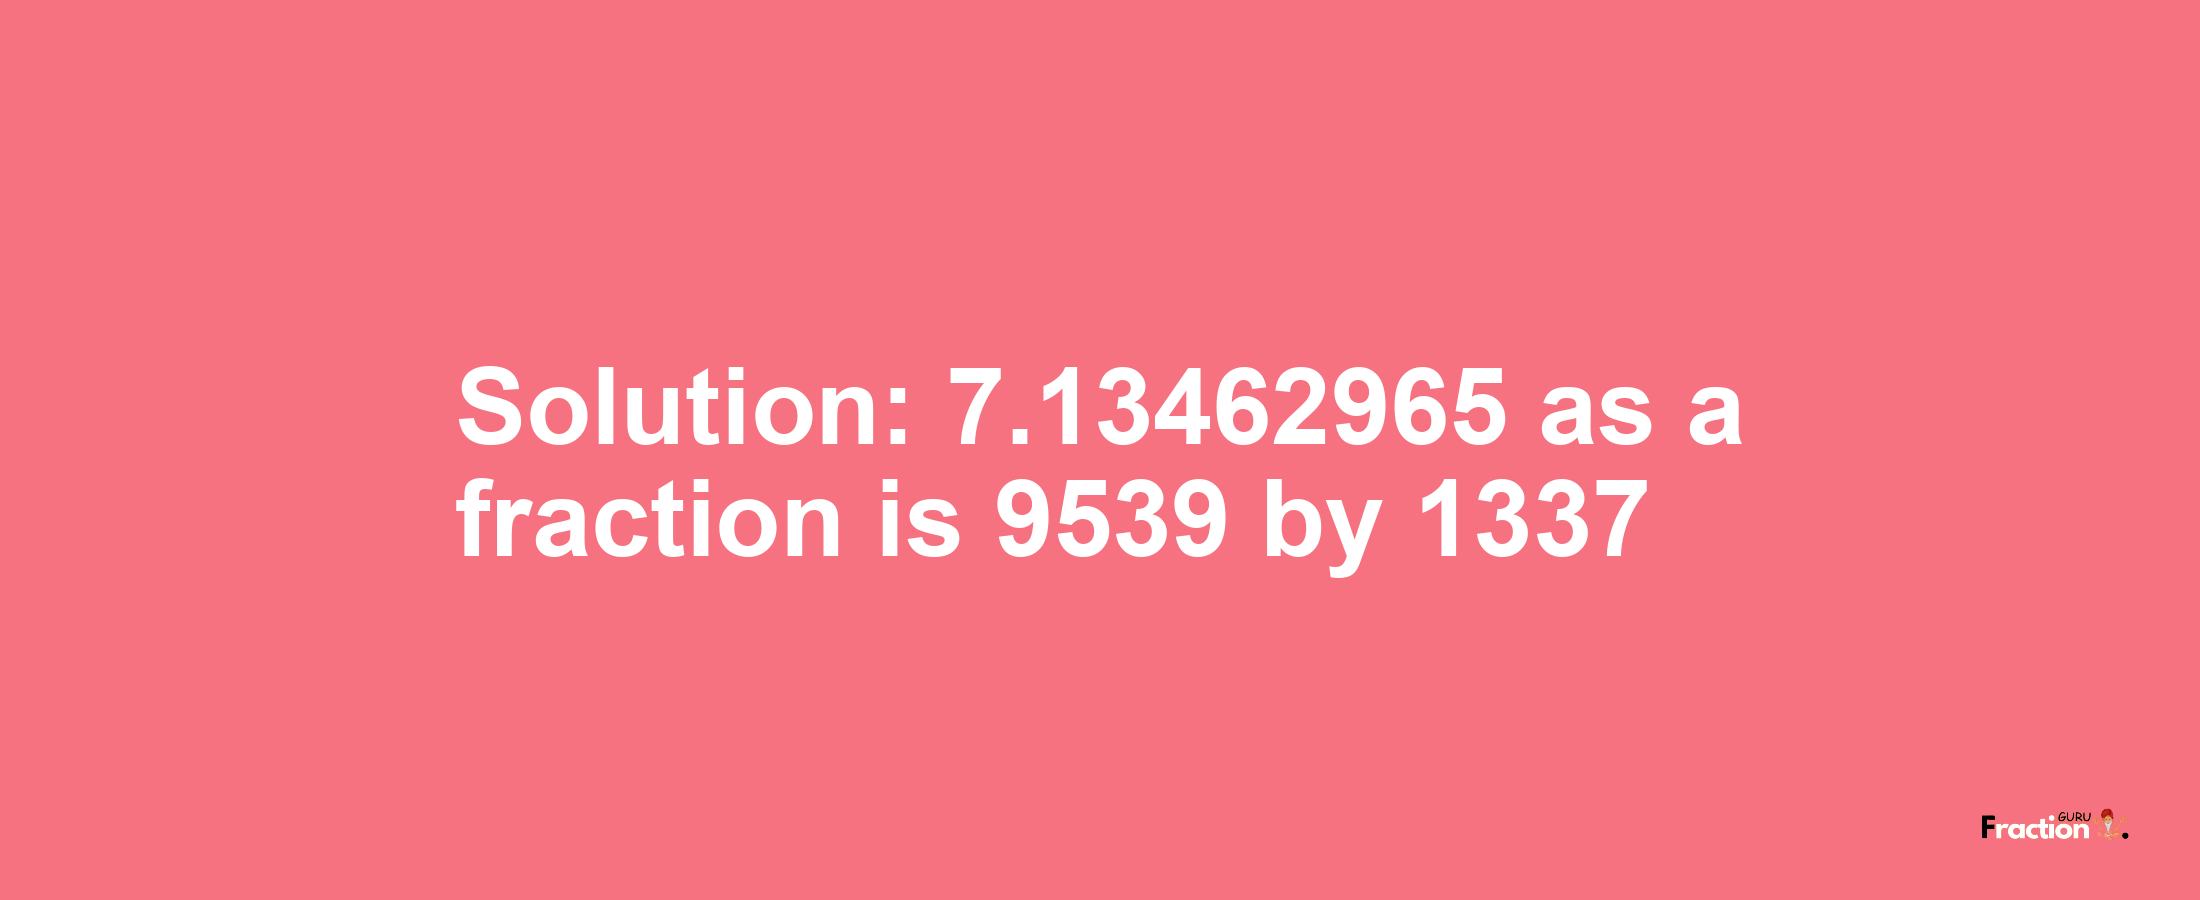 Solution:7.13462965 as a fraction is 9539/1337